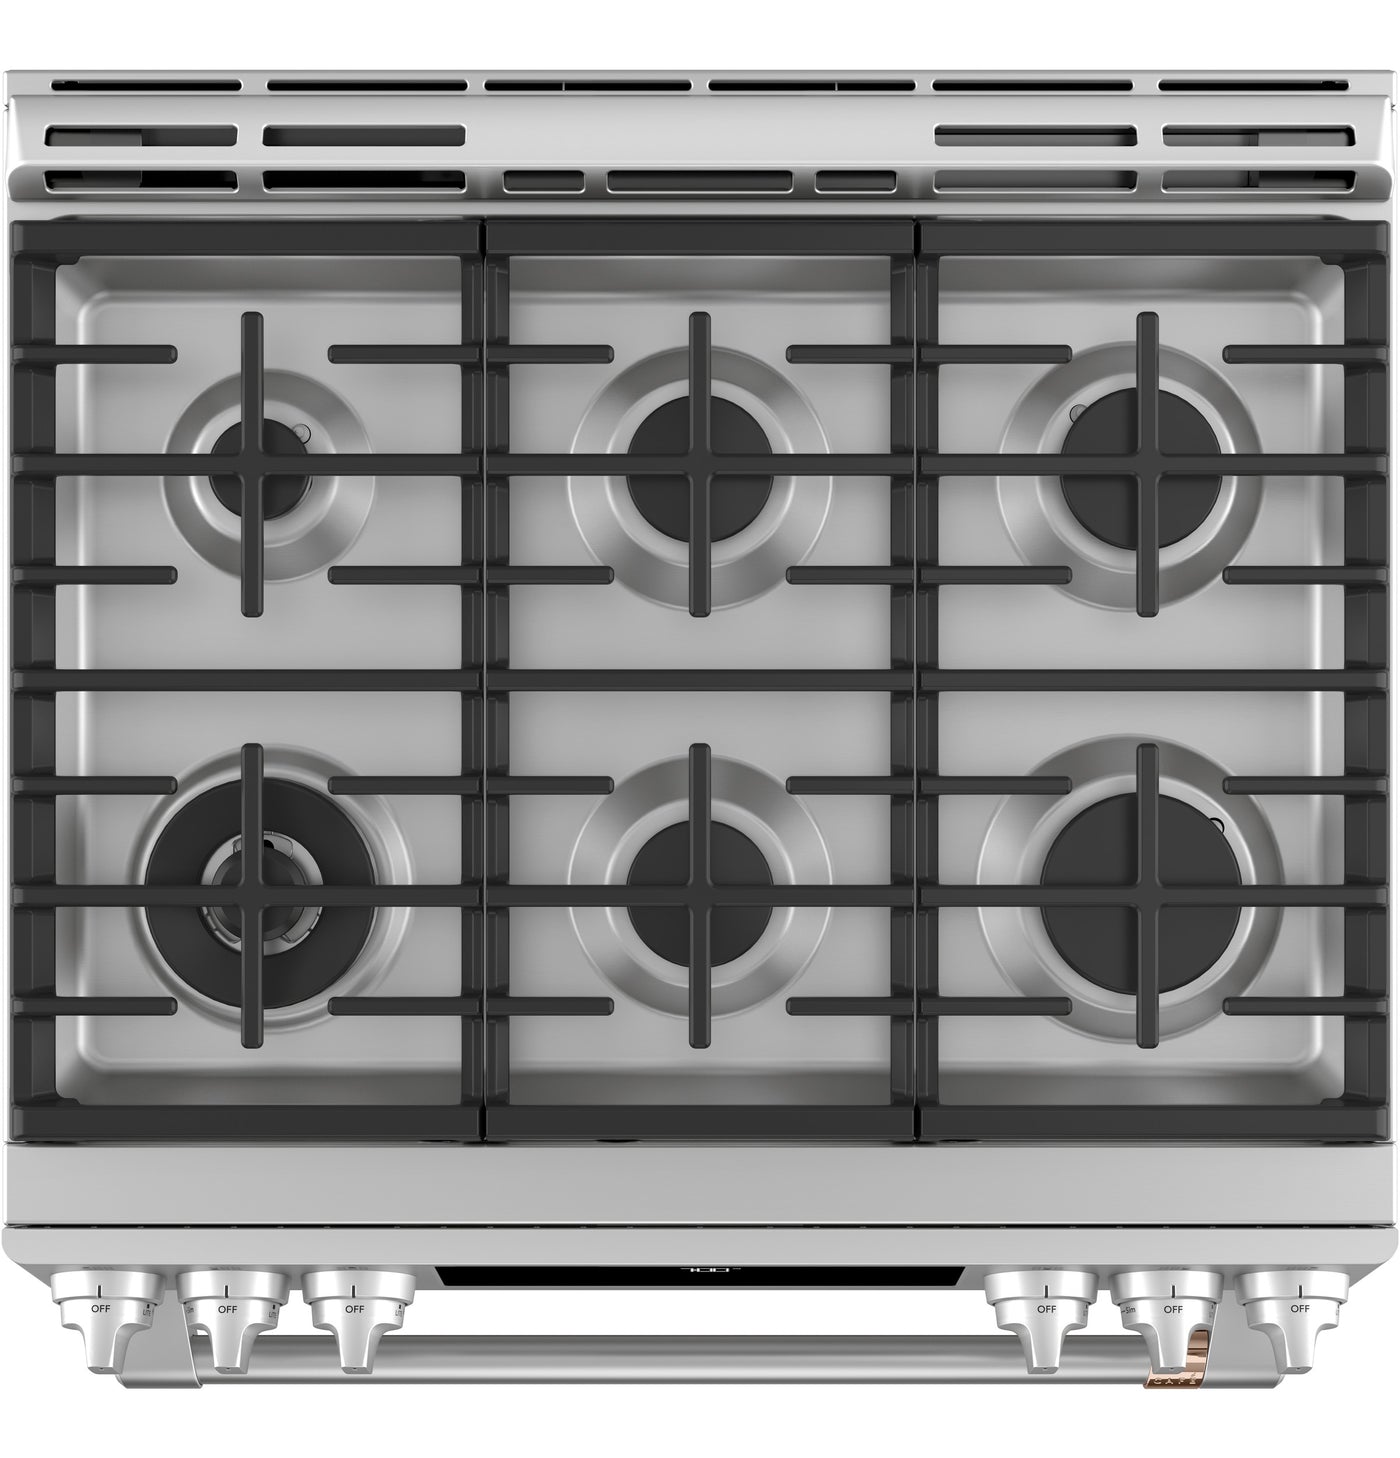 Café™ Stainless Steel 30" Slide-In Front Control Gas Oven with Convection Range and Air Fry (5.6 Cu.Ft) - CCGS700P2MS1